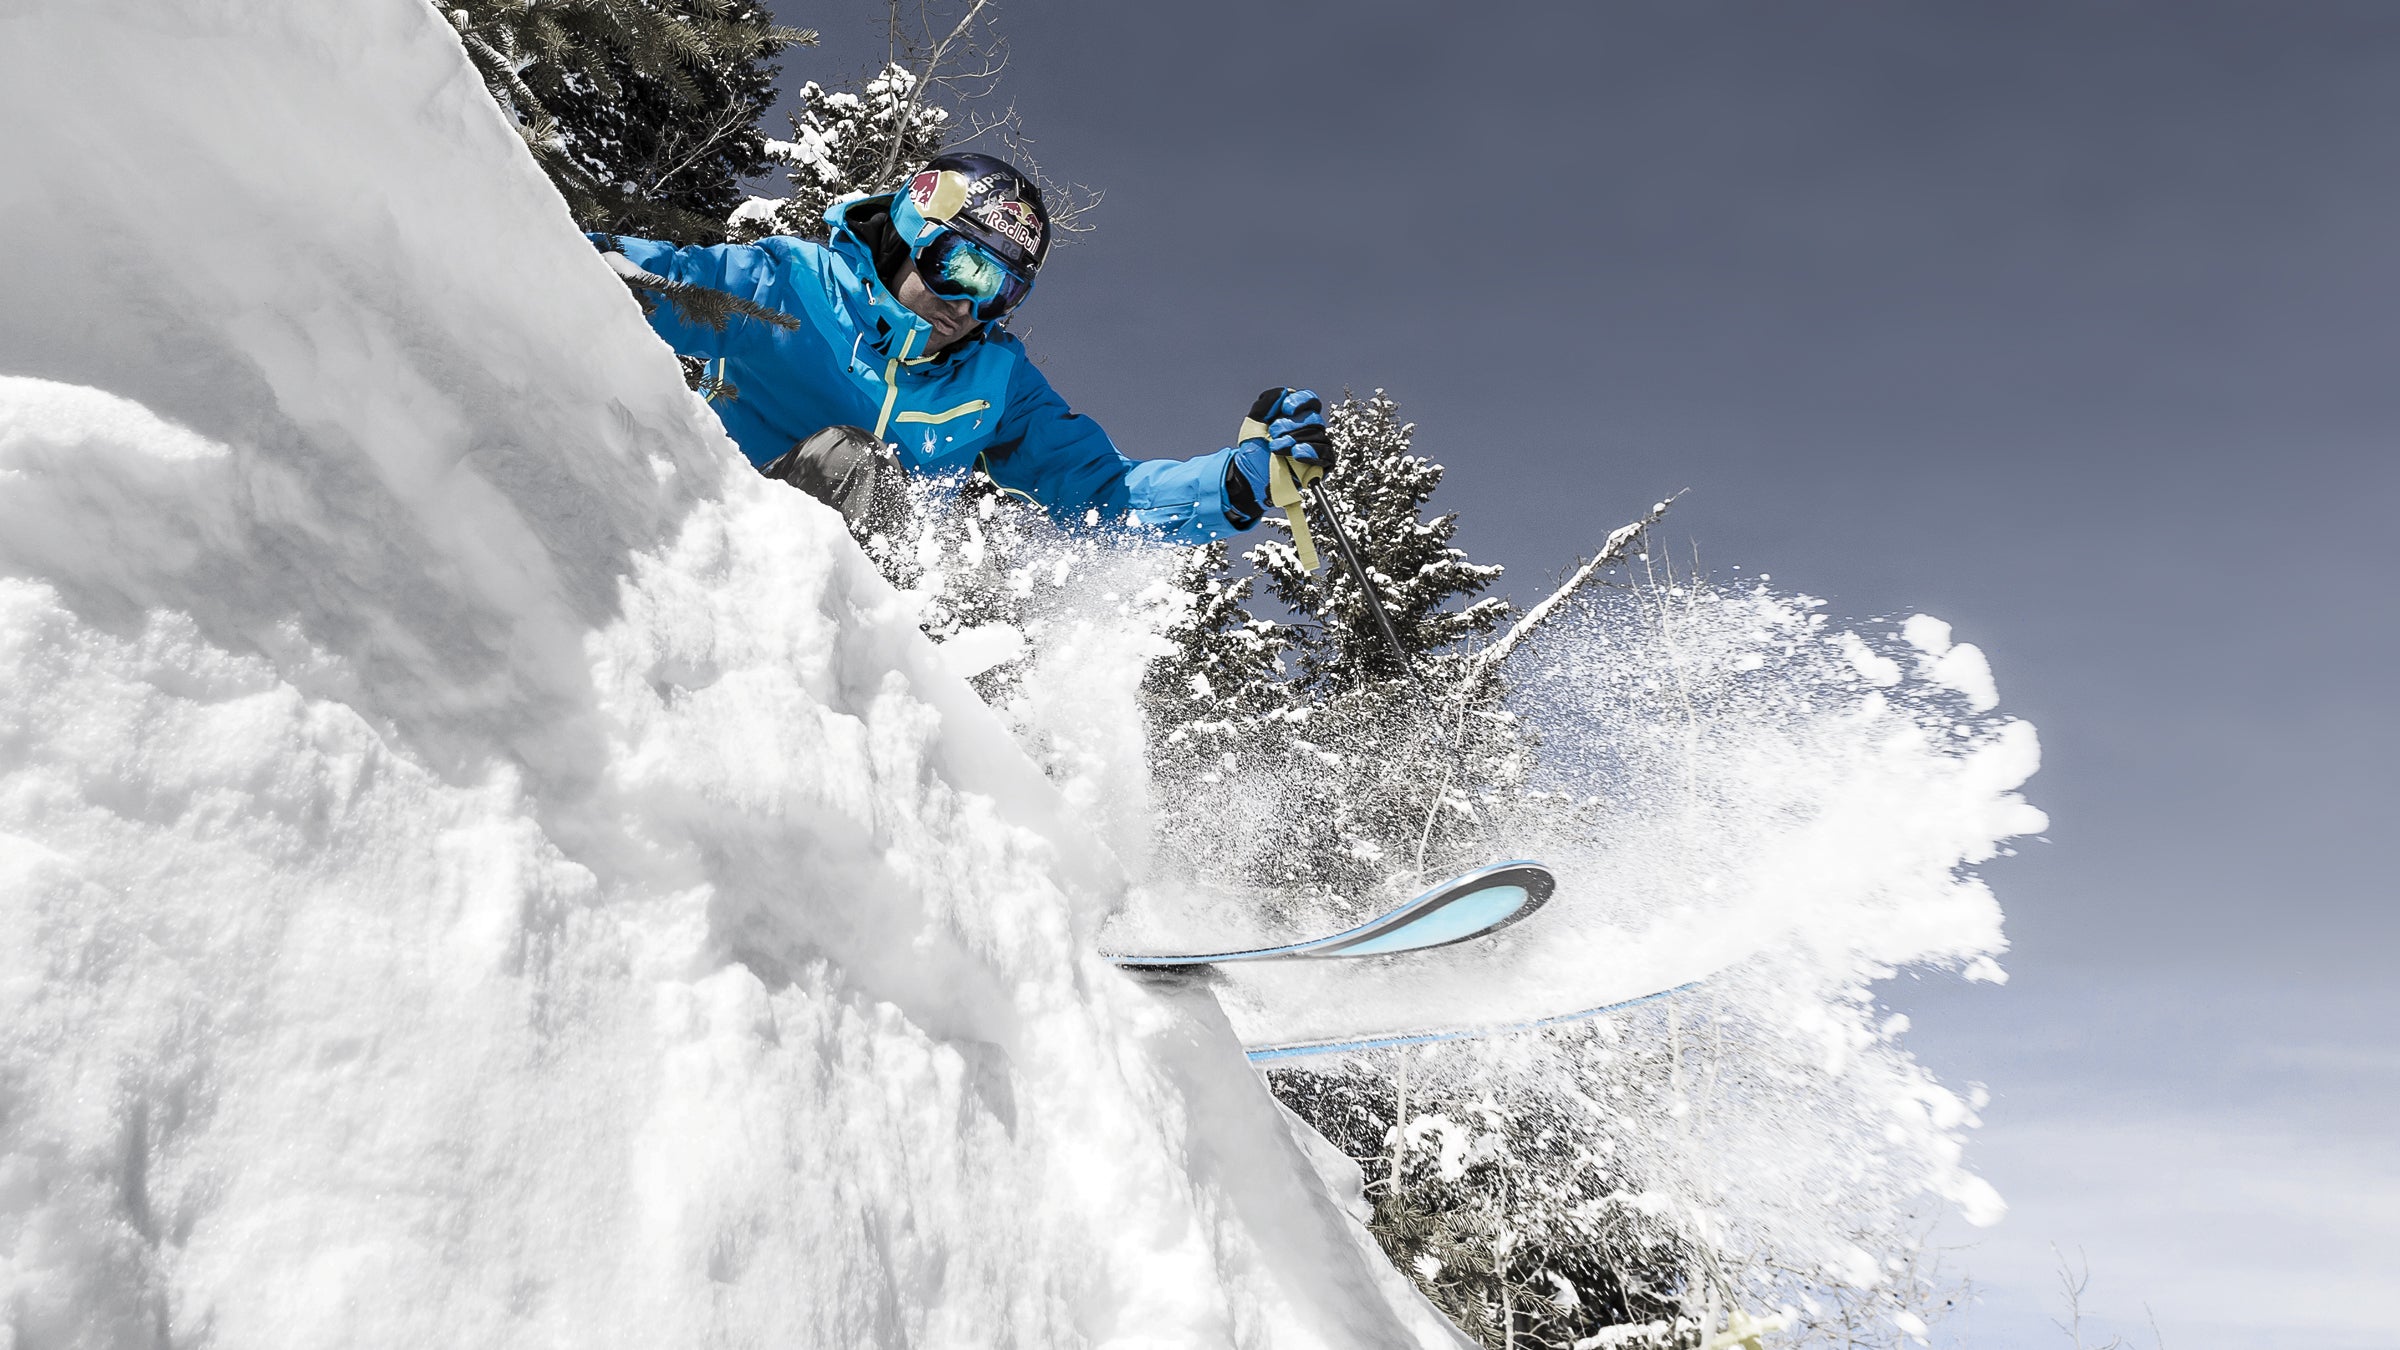 Snow Gear Essentials for Winter Adventure Sports - Outside Online